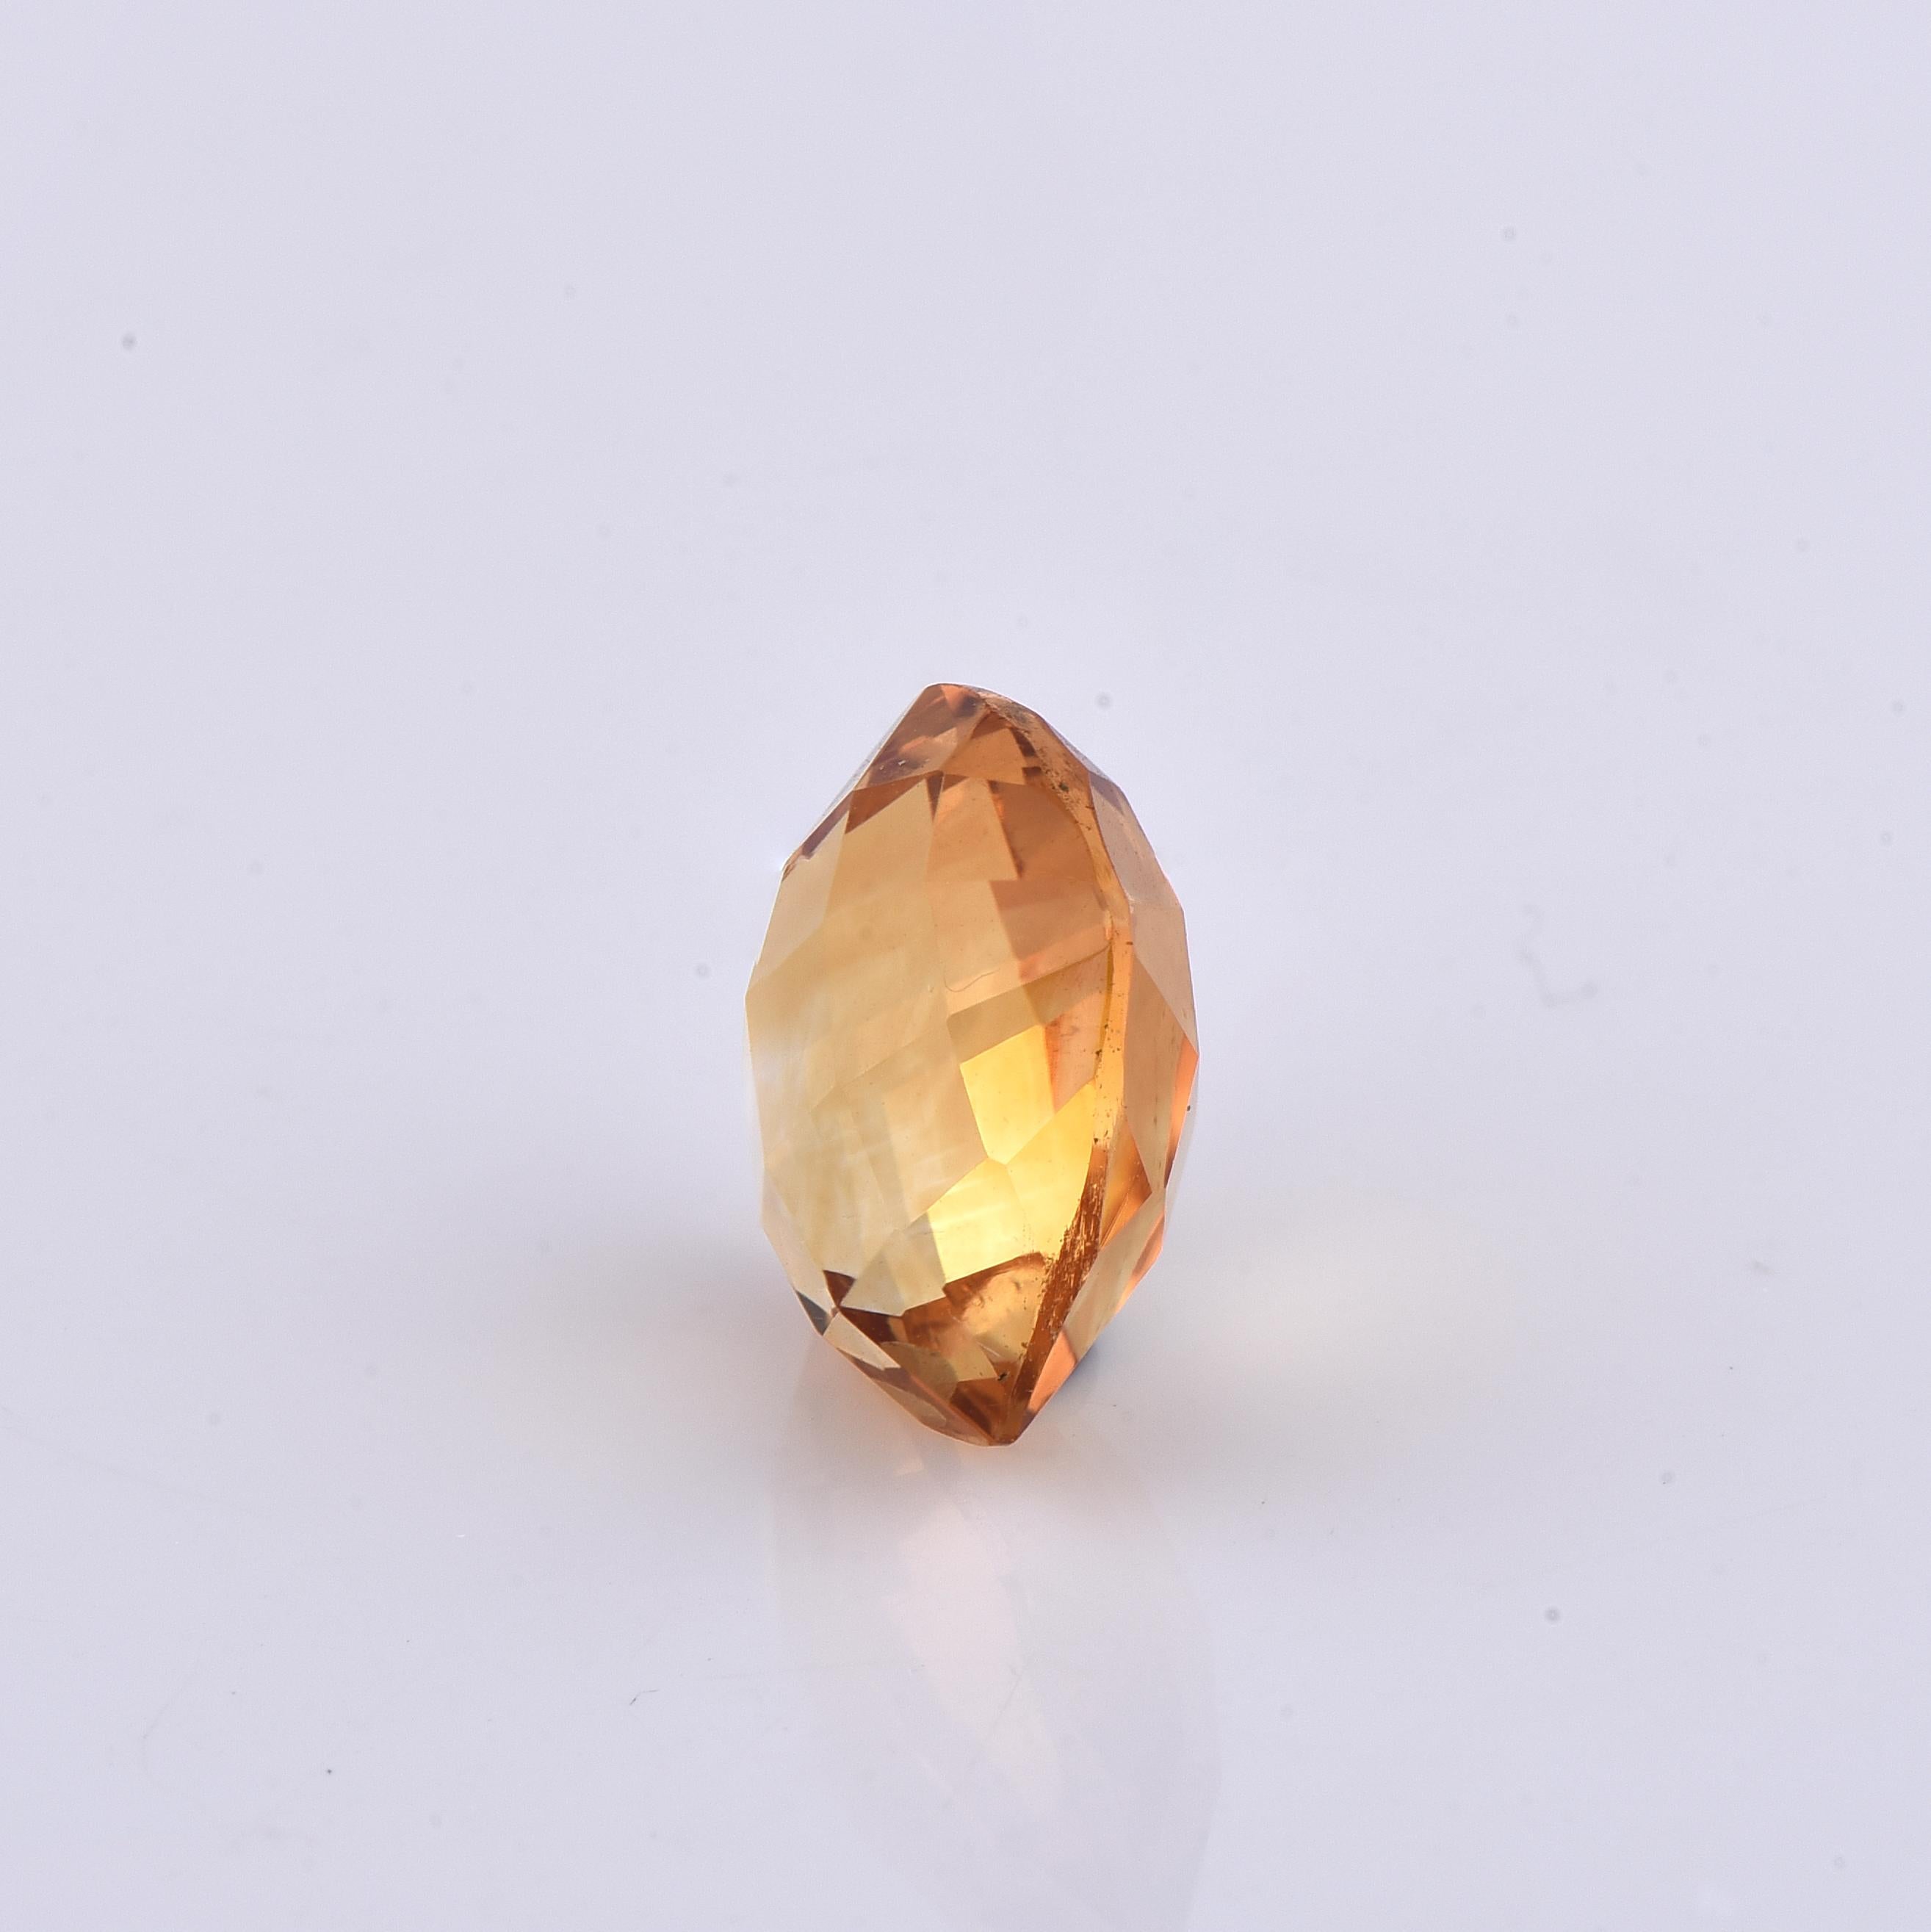 Modern TJD Loose 3.97 Ct Cushion Cut Yellow Natural Citrine Gemstone for Ring & Pendant For Sale